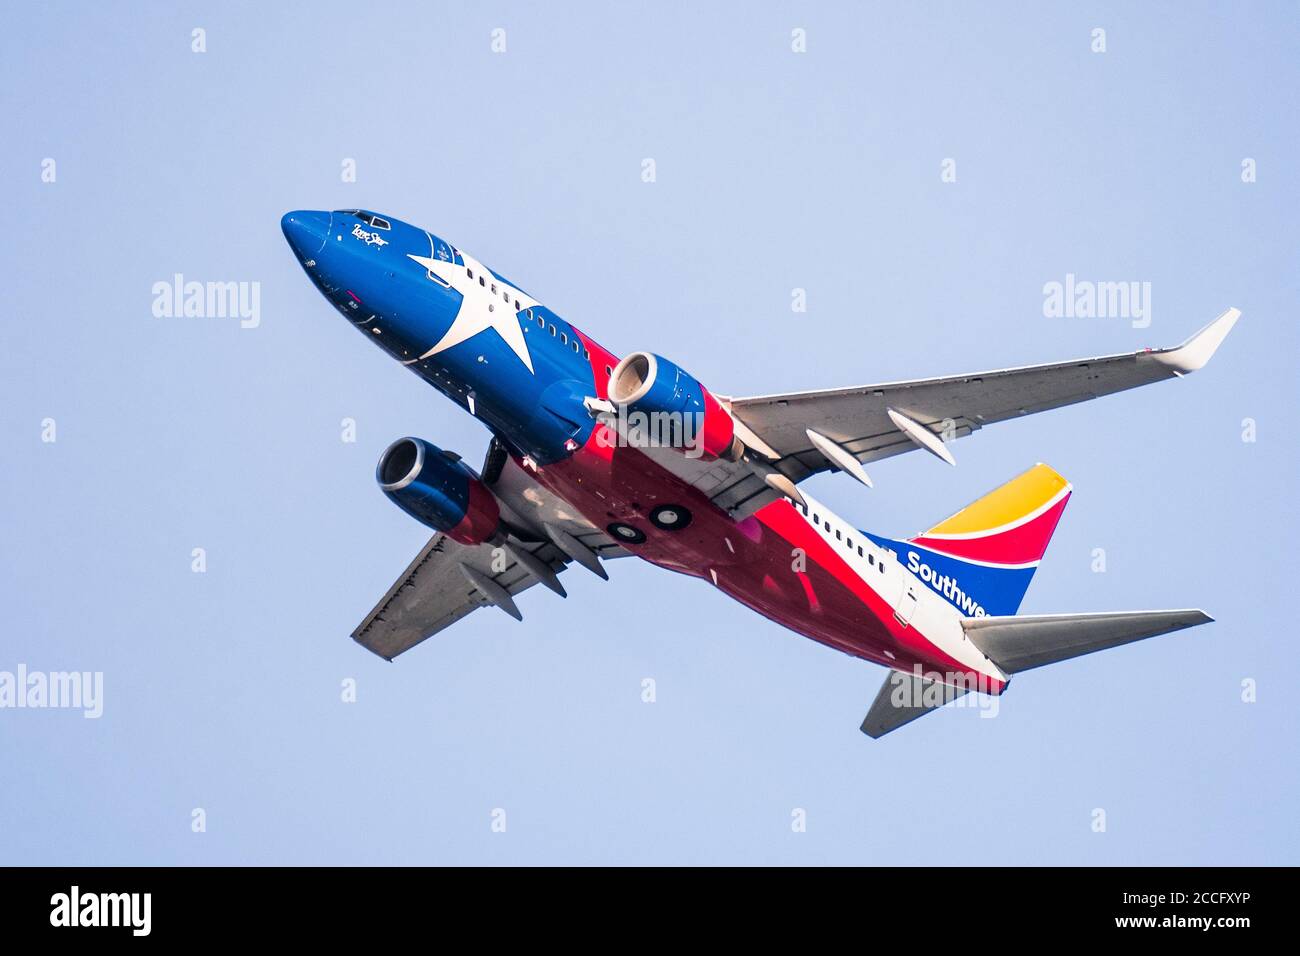 August 7, 2020 San Jose / CA / USA - Lone Star One Southwest Airlines taking off from San Jose International Airport (SJC); Lone Star One livery is ho Stock Photo